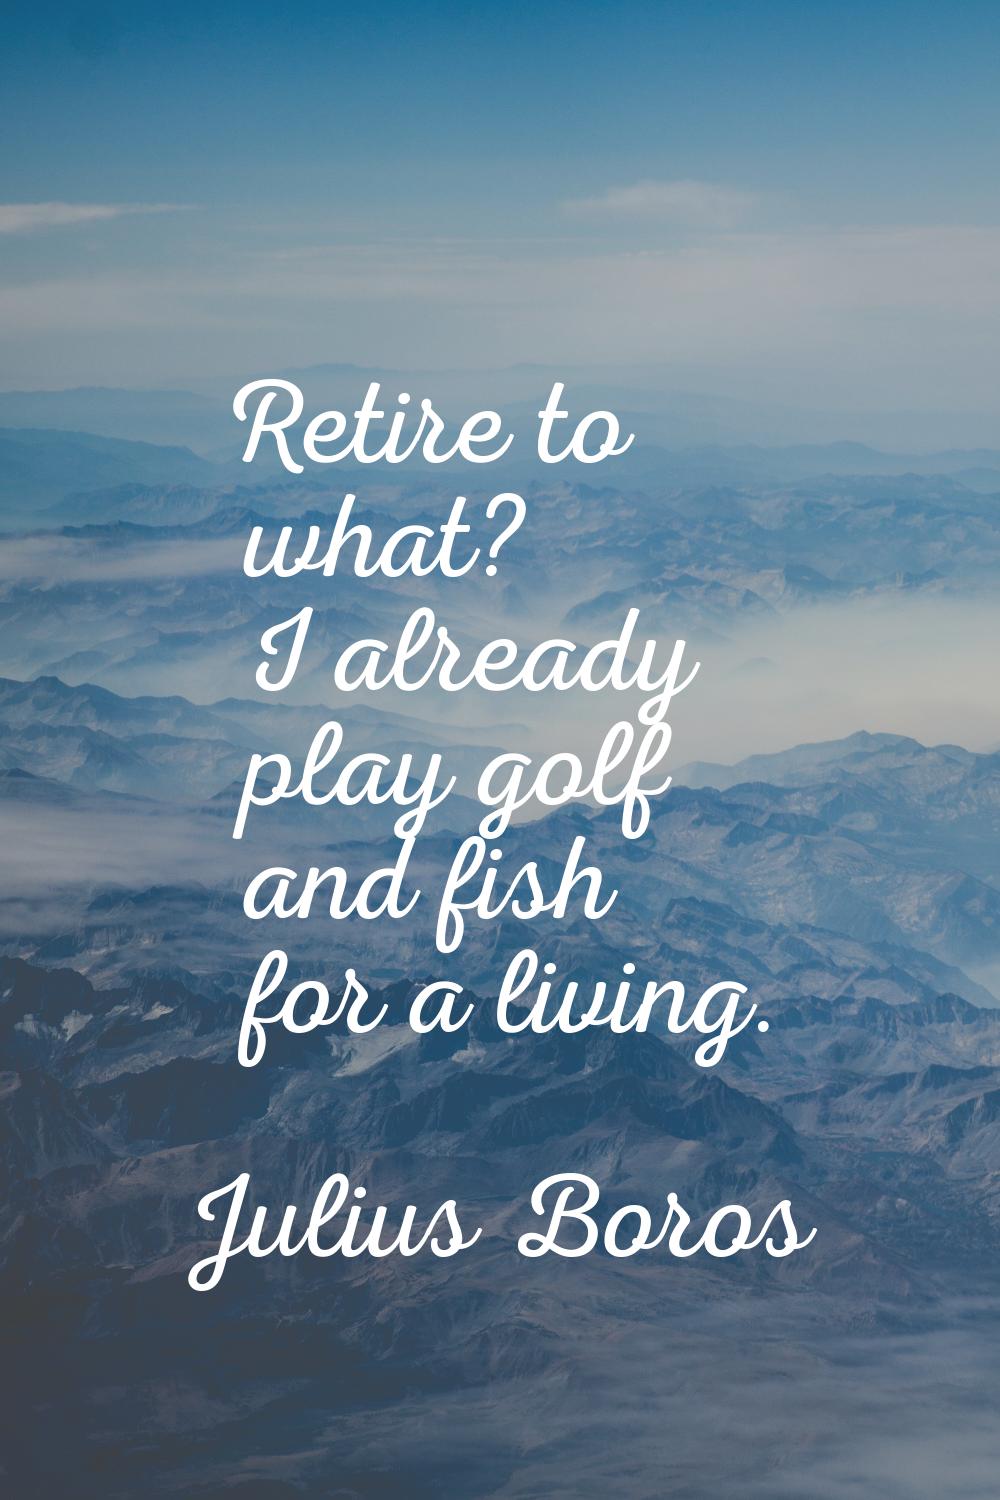 Retire to what? I already play golf and fish for a living.